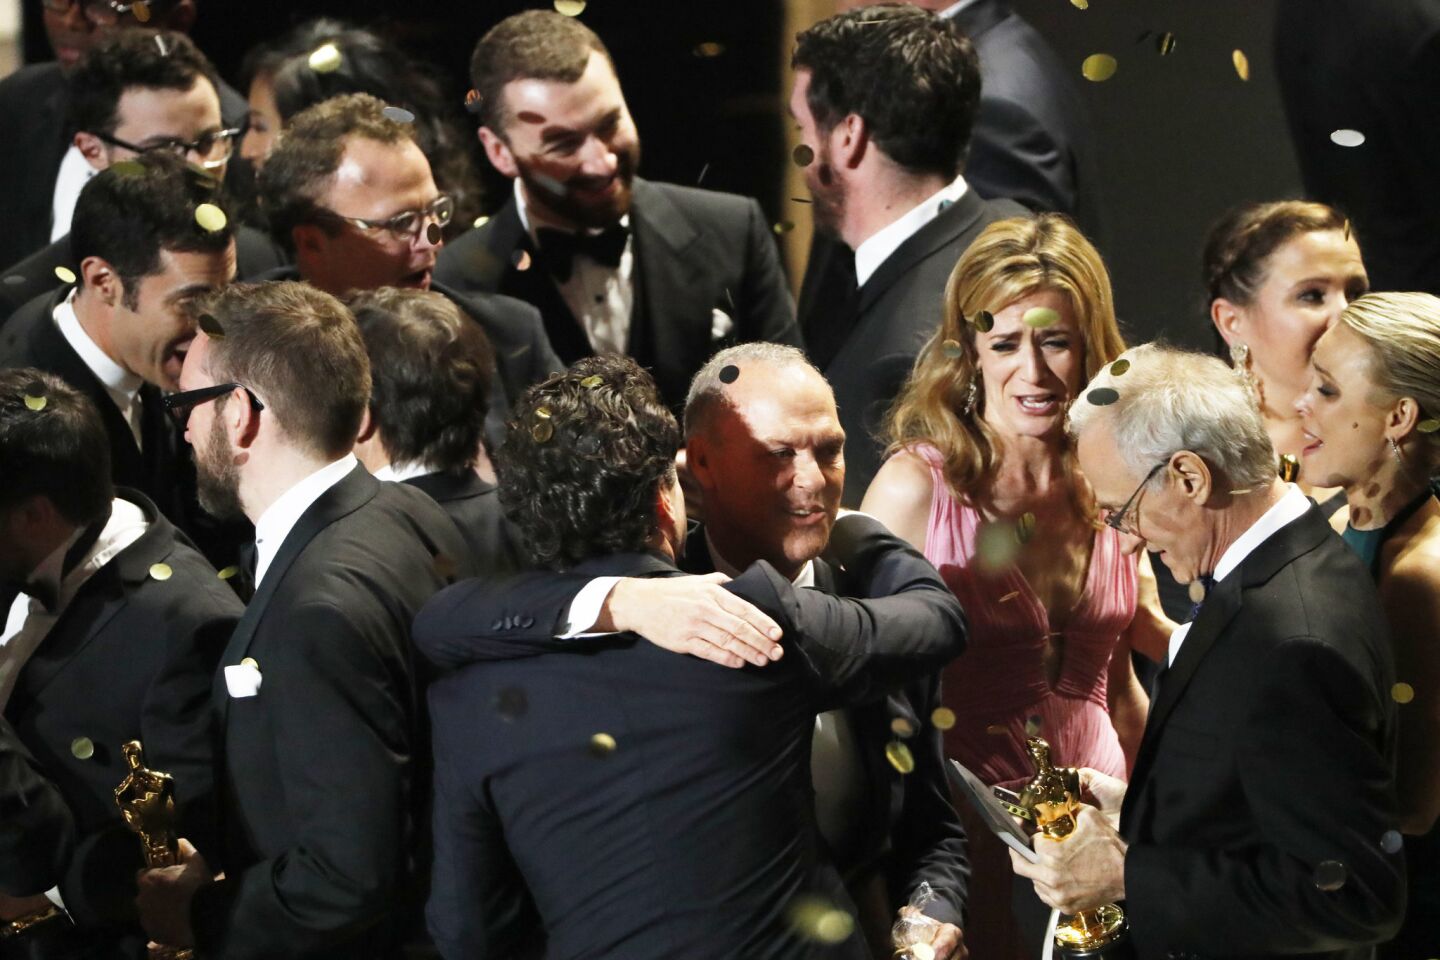 Michael Keaton and the cast and producers of "Spotlight" celebrate after winning the Oscar for best picture.